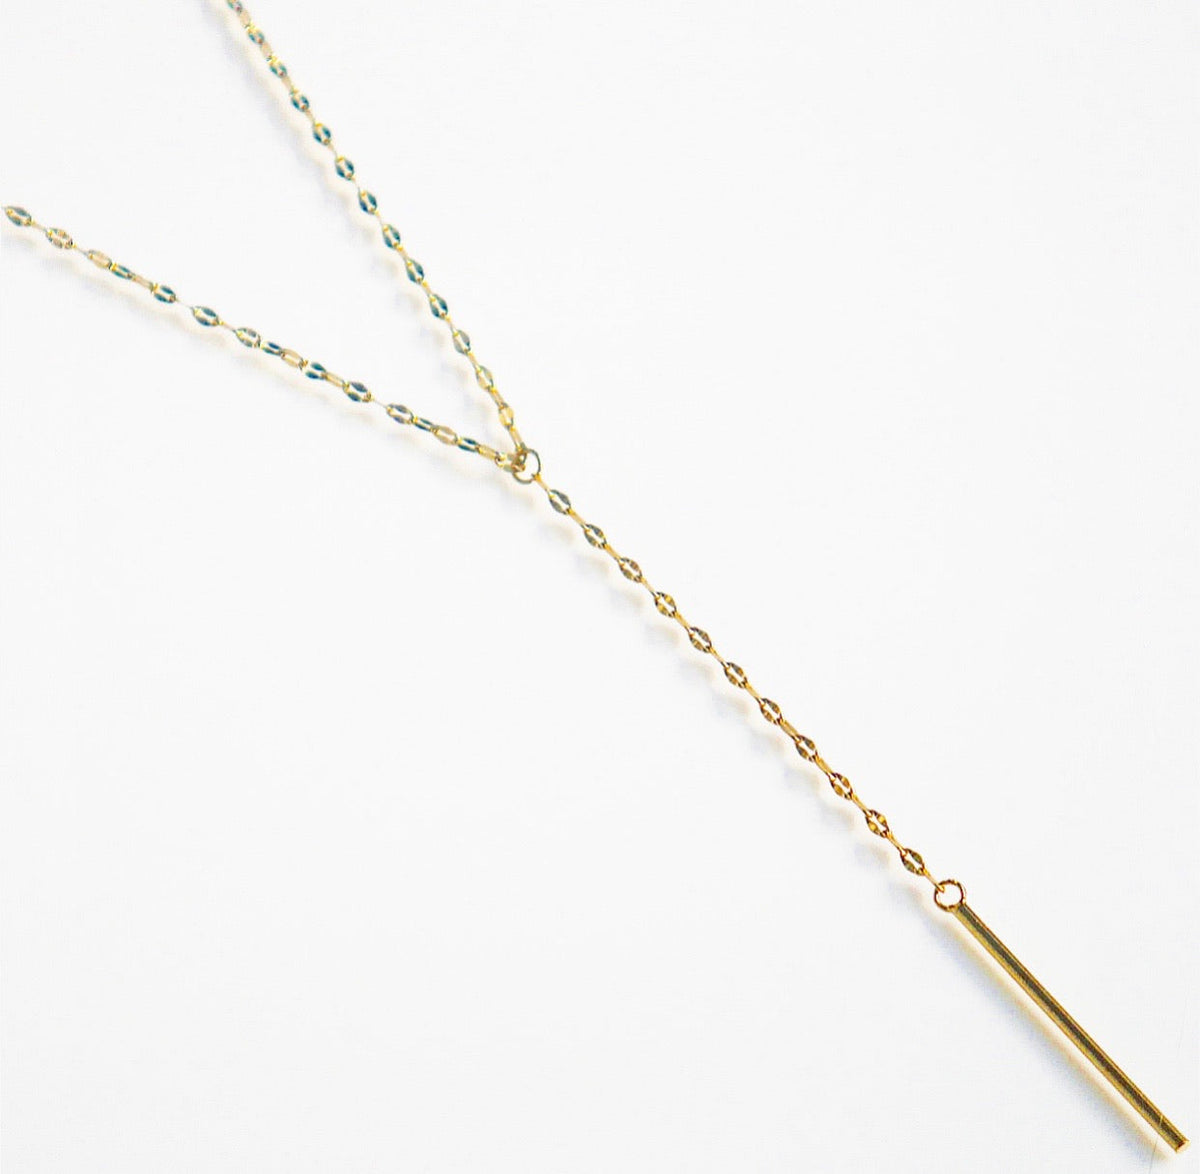 necklaces, gold plated necklaces, gold necklaces, lariat necklaces, dainty lariat necklace, cheap lariat necklaces, designer jewelry, fashion jewelry, trending accessories, gold plated jewelry, popular necklaces, necklaces for low cut shirt, necklaces for low cut dress, waterproof necklaces, nickel free jewelry, birthday gifts, anniversary gifts, dainty necklaces, kesley jewelry 